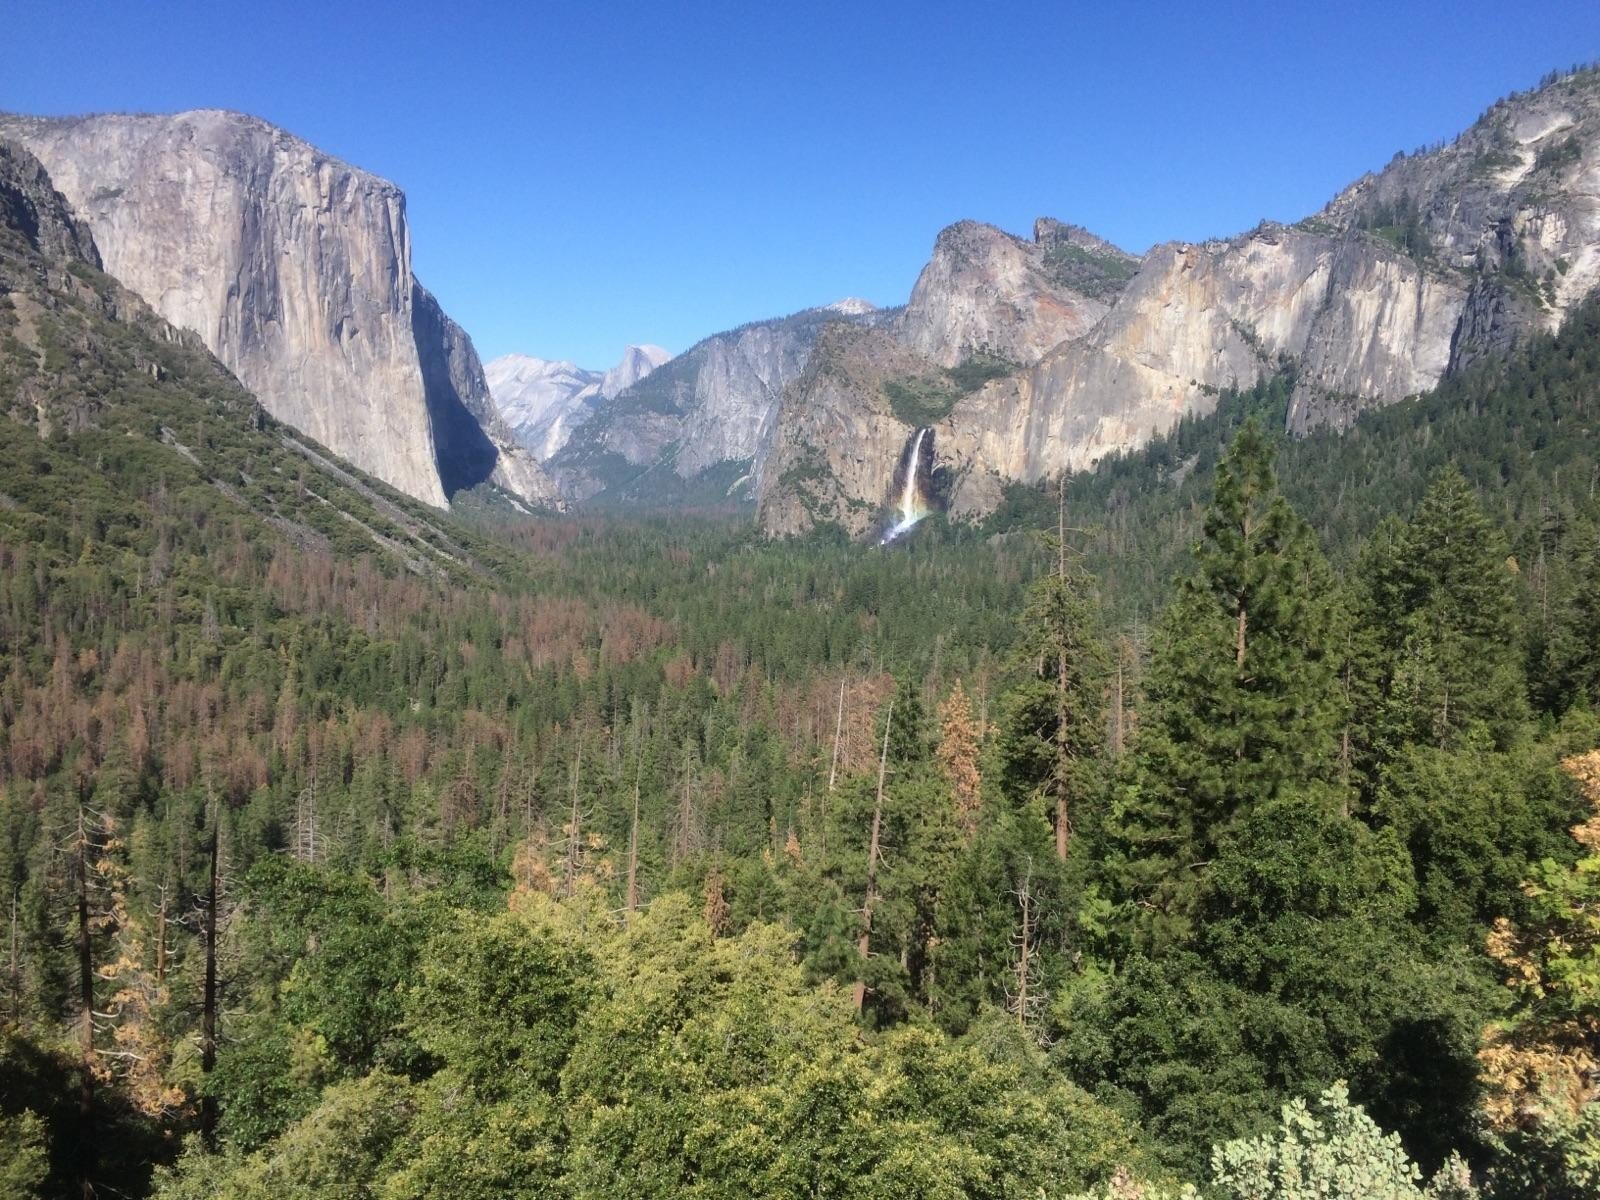 Watch the Photo by mznataliaalexandria with the username @mznataliaalexandria, who is a star user, posted on June 29, 2017 and the text says 'The views from Yosemite National Park&hellip; from “Slave BC” #yosemite  #moon  #bareass  #public  #nudism  #tourism  #slave  #training  #task'